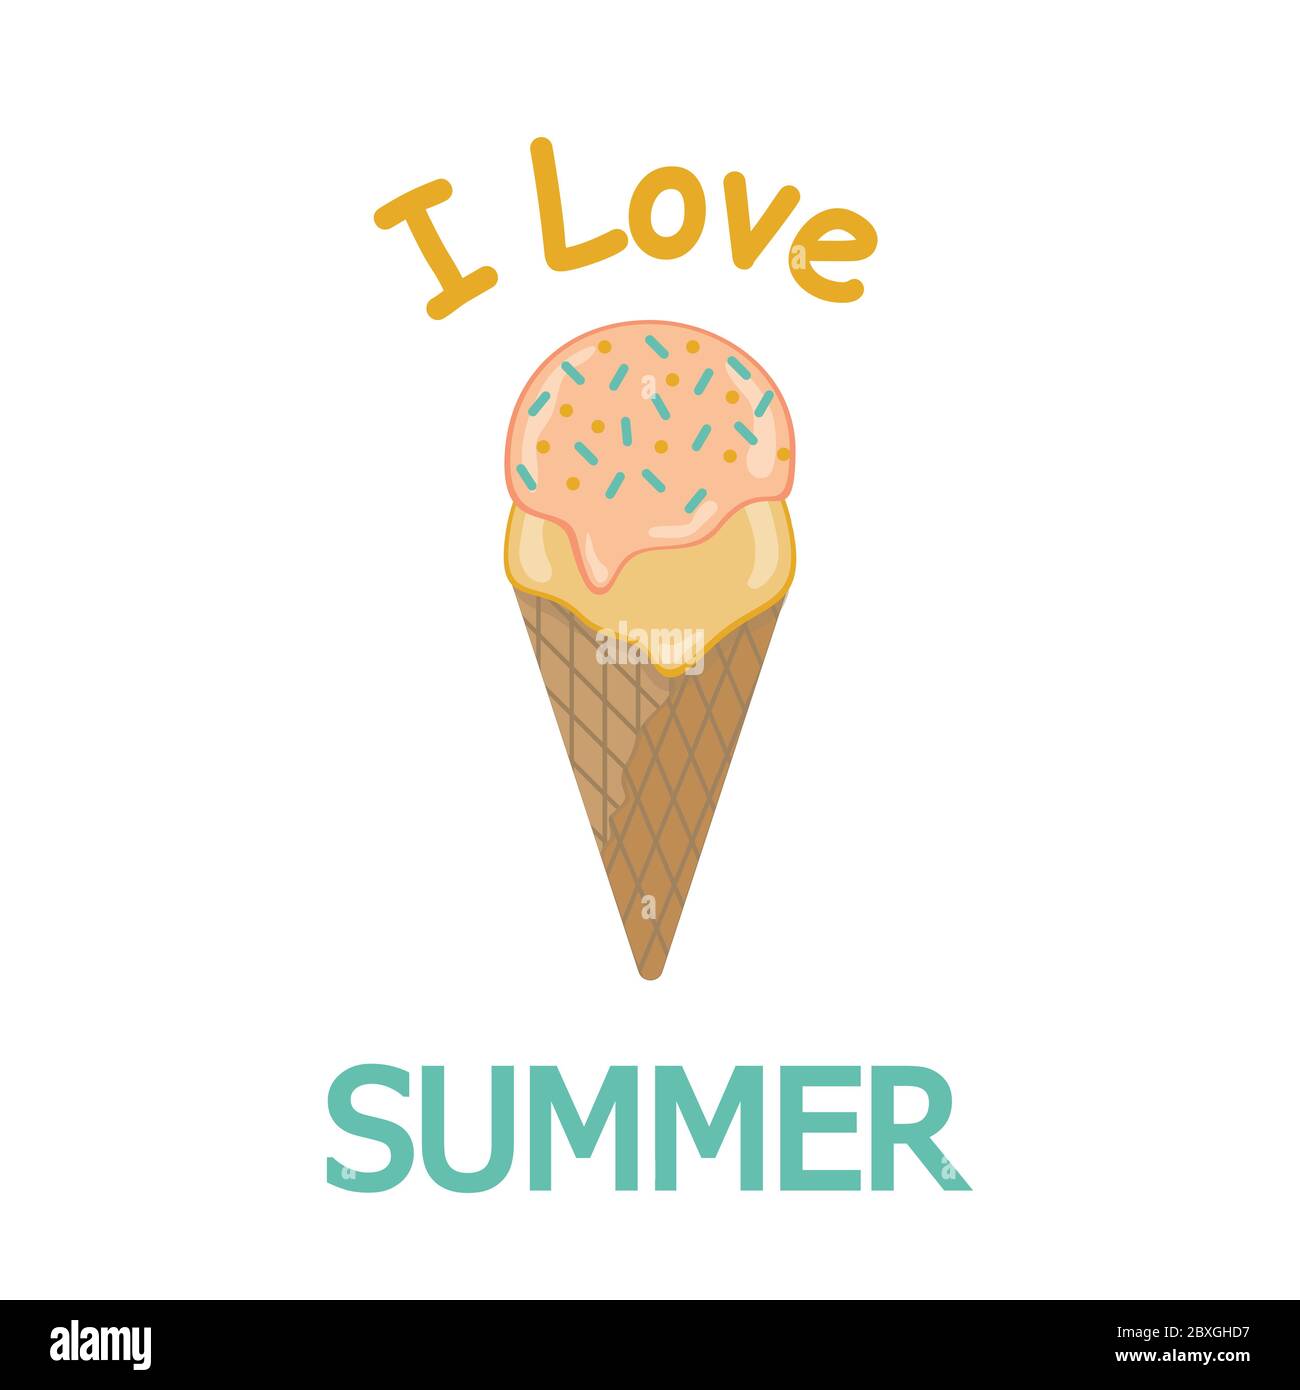 Vector I love summer Ice cream illustration. Great for summer holidays, backgrounds, gifts, packaging design projects. Surface pattern design. Stock Vector